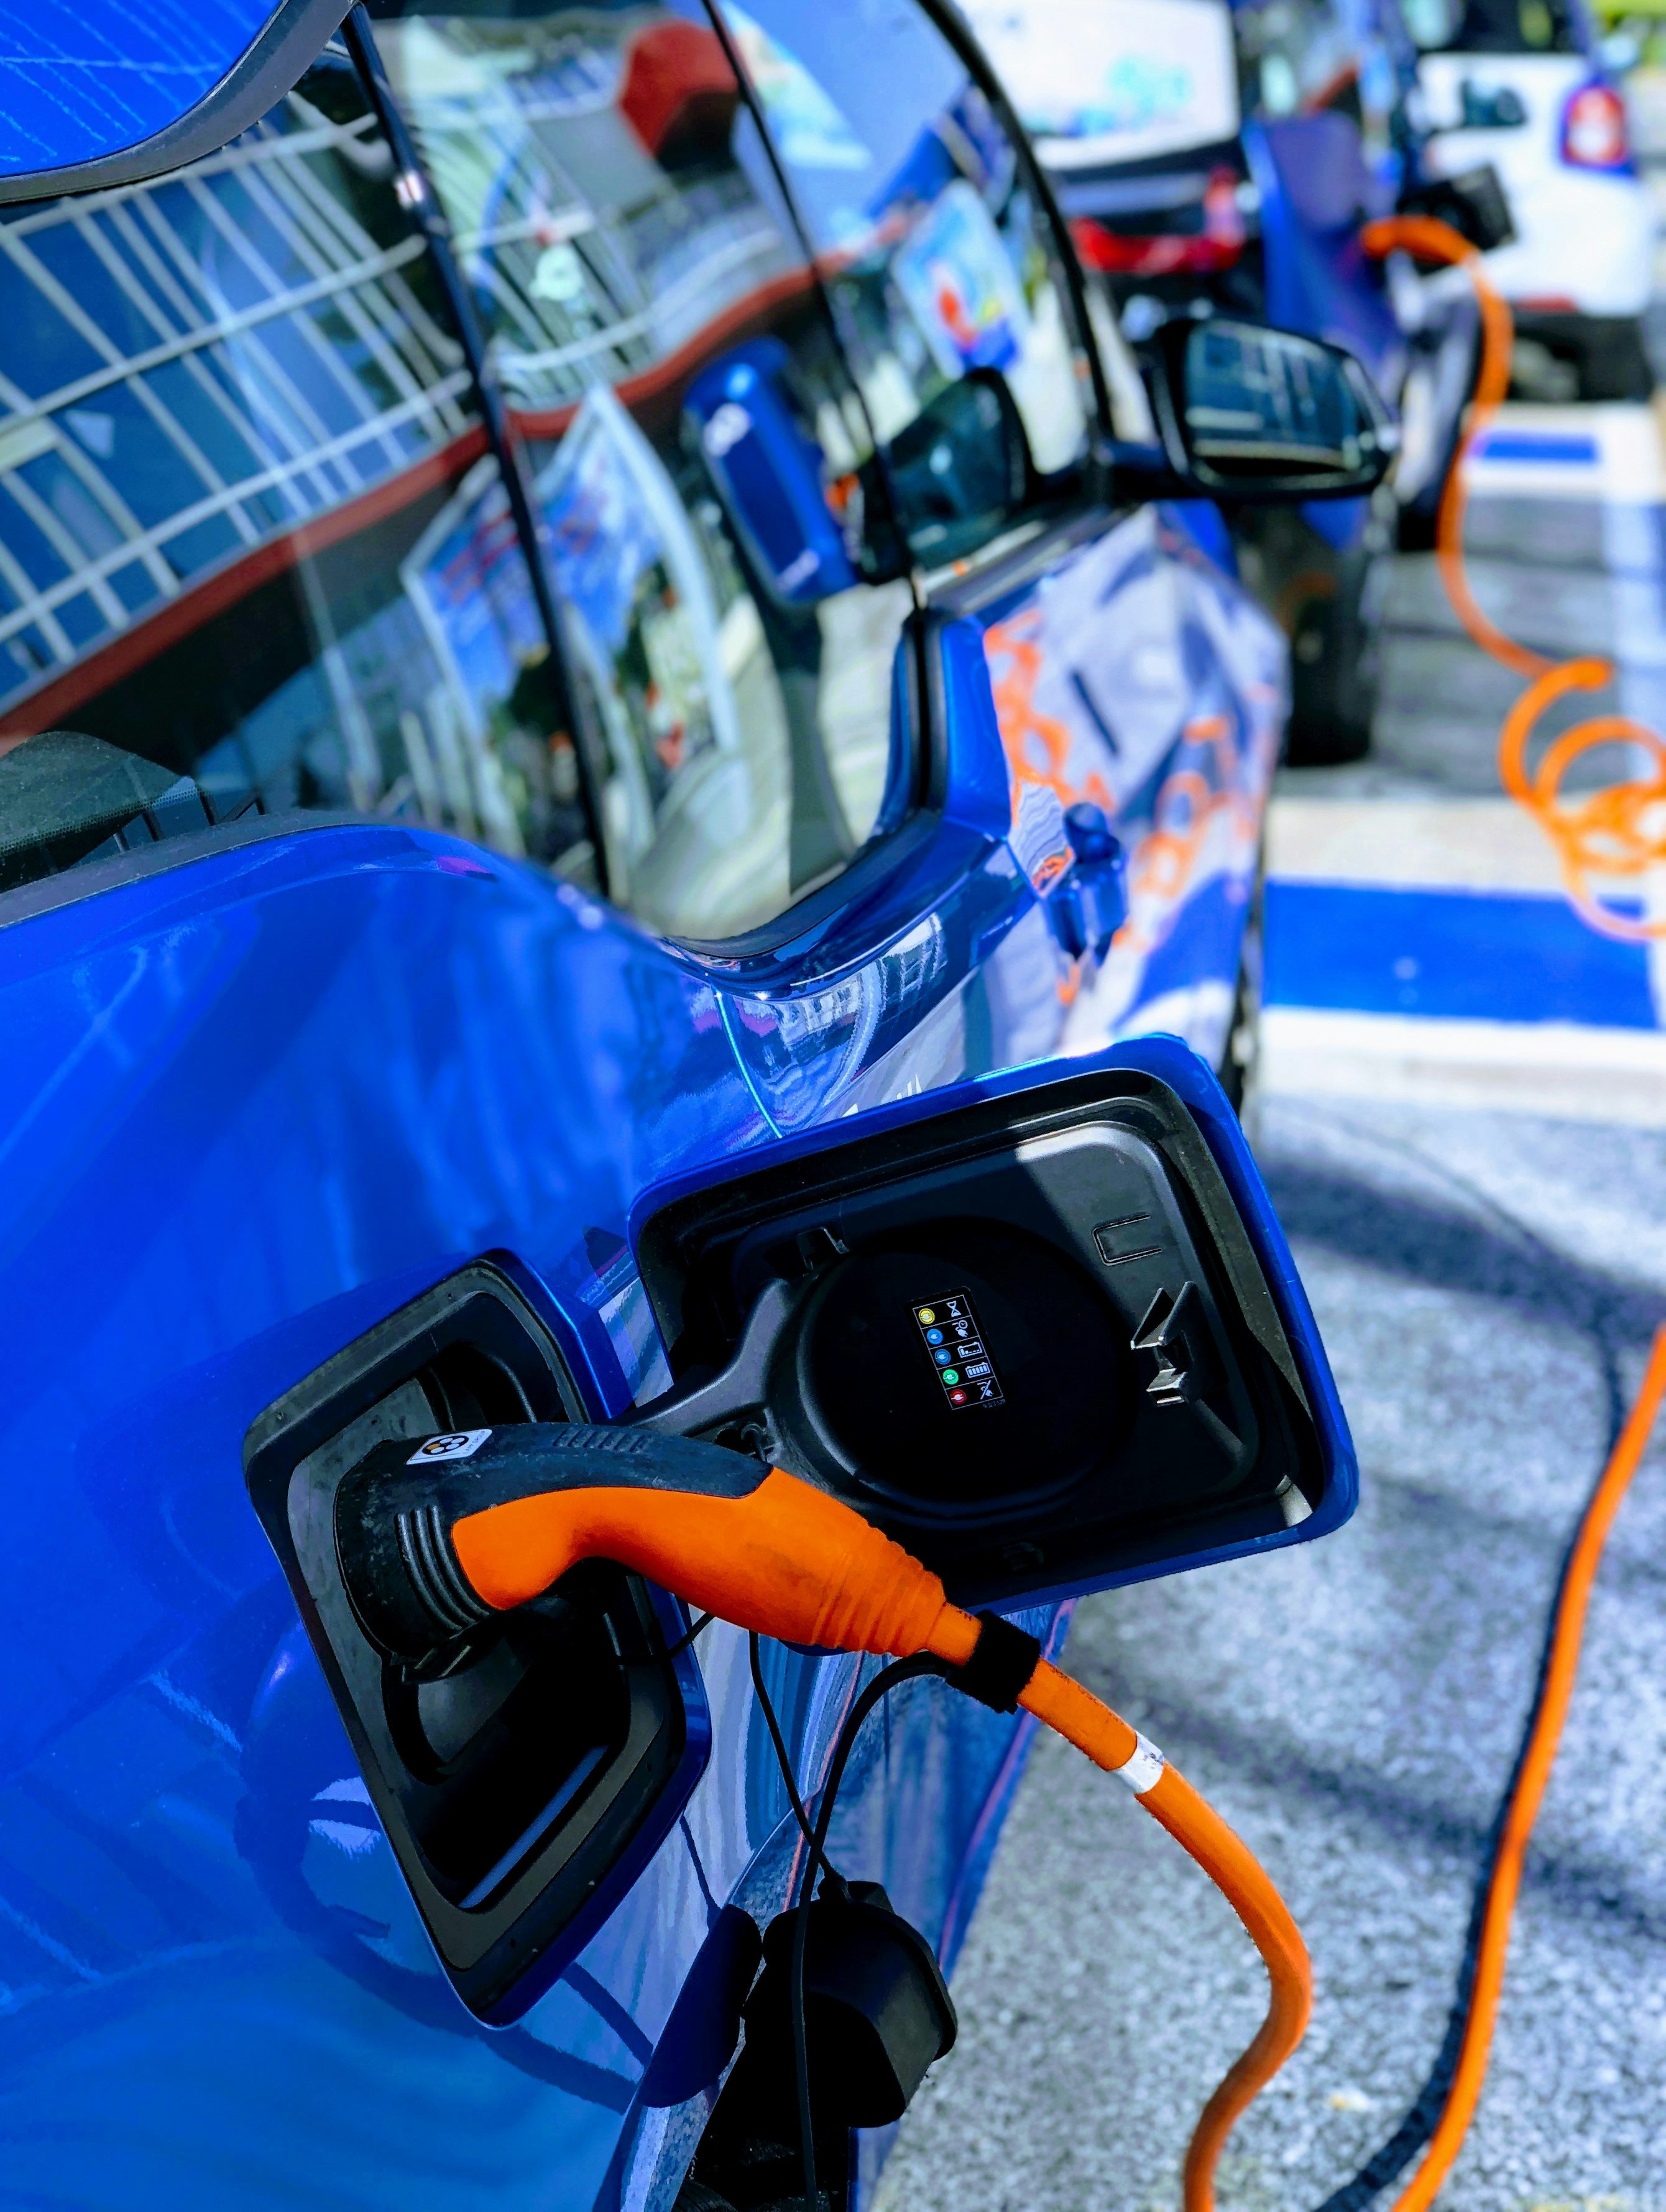 EV transition: An electric vehicle for you, an economic vision for India